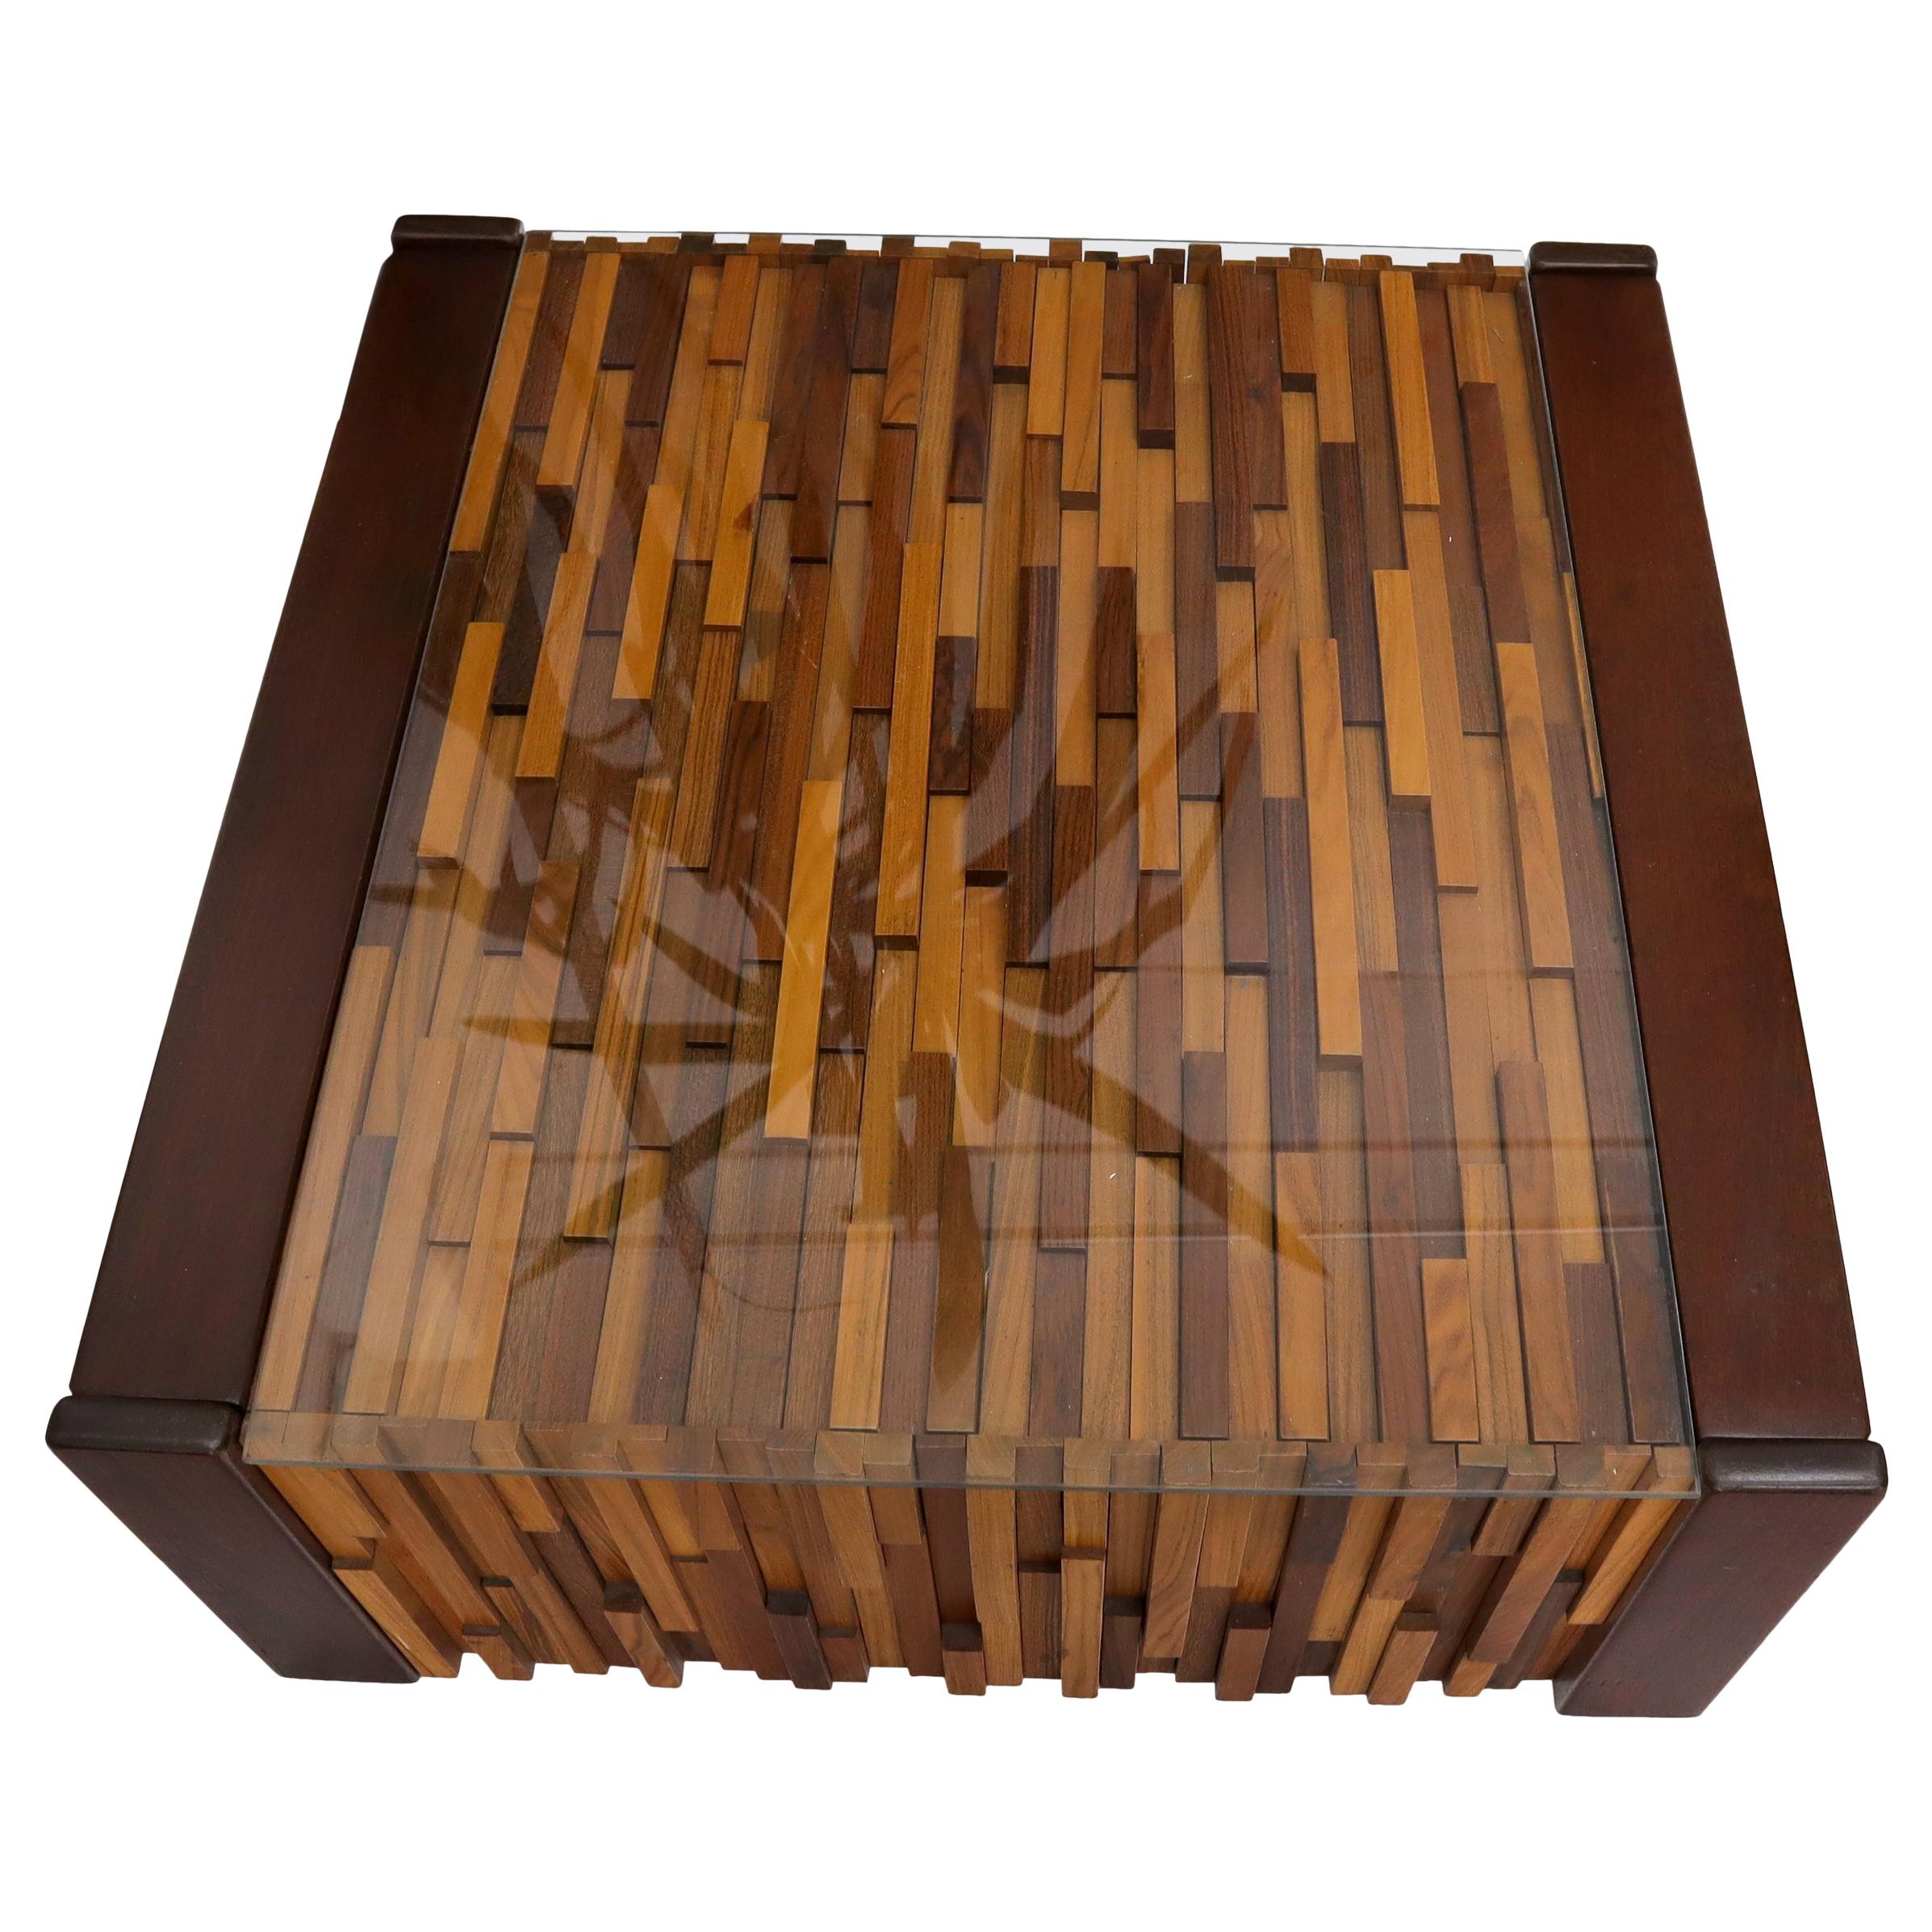 Pair of Percival Lafer Coffee Table Brazilian Rosewood Exotic Wood Mosaic